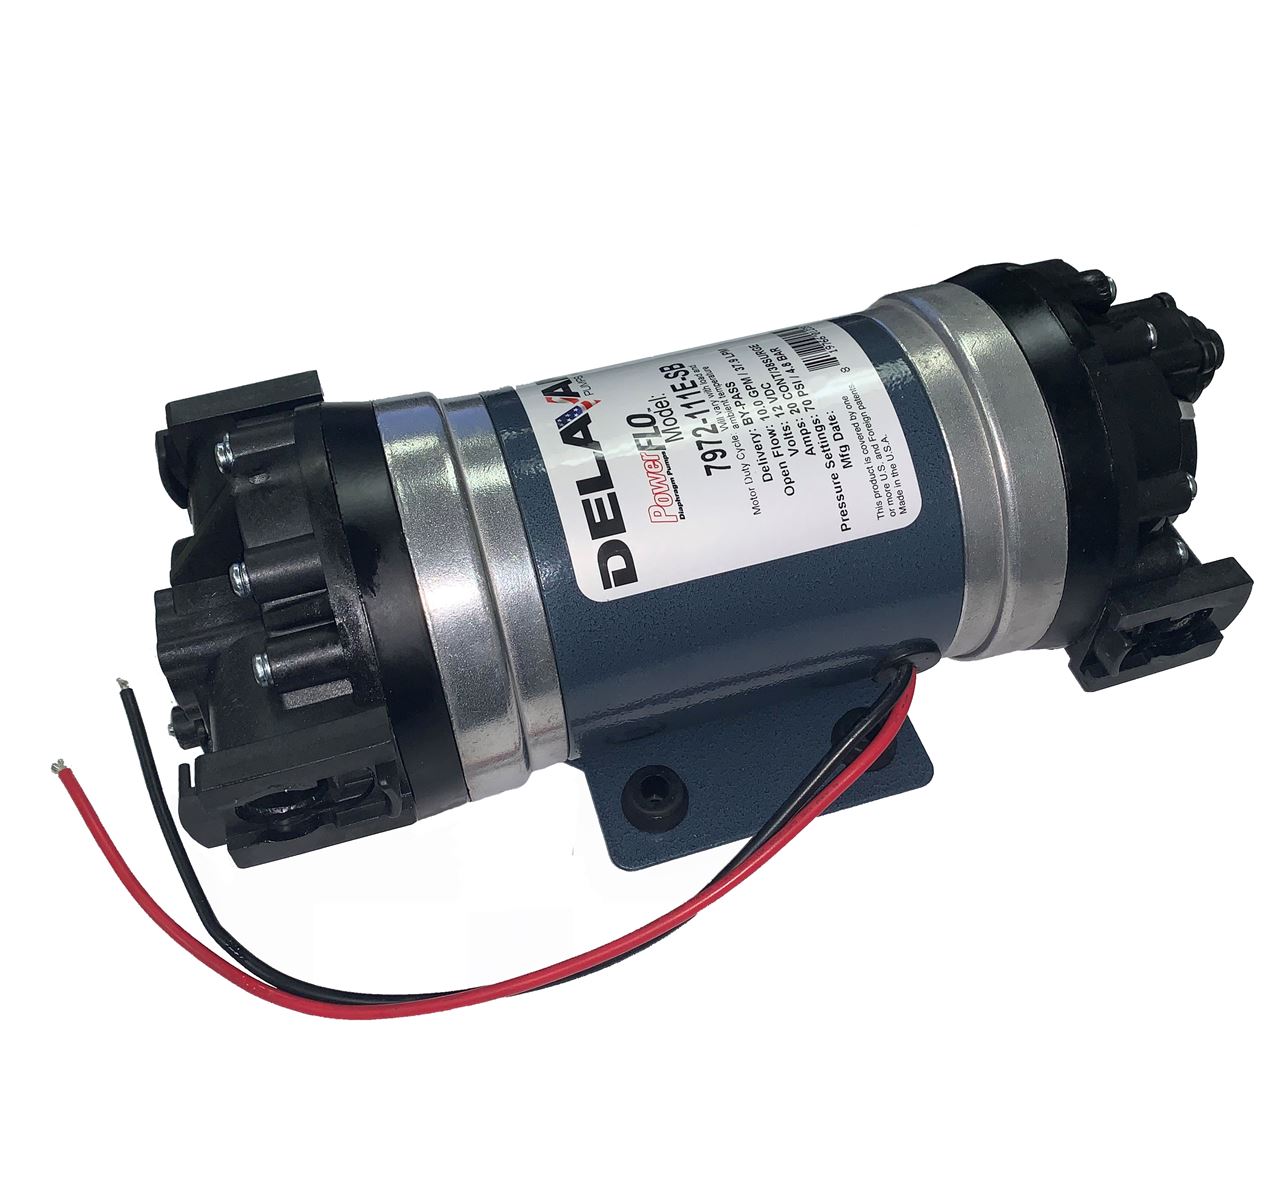 https://www.pwmall.com/content/images/thumbs/0056752_delavan-fb6-double-pump-12v-70-psi10-gpm-byp-34-quick-attach.jpeg